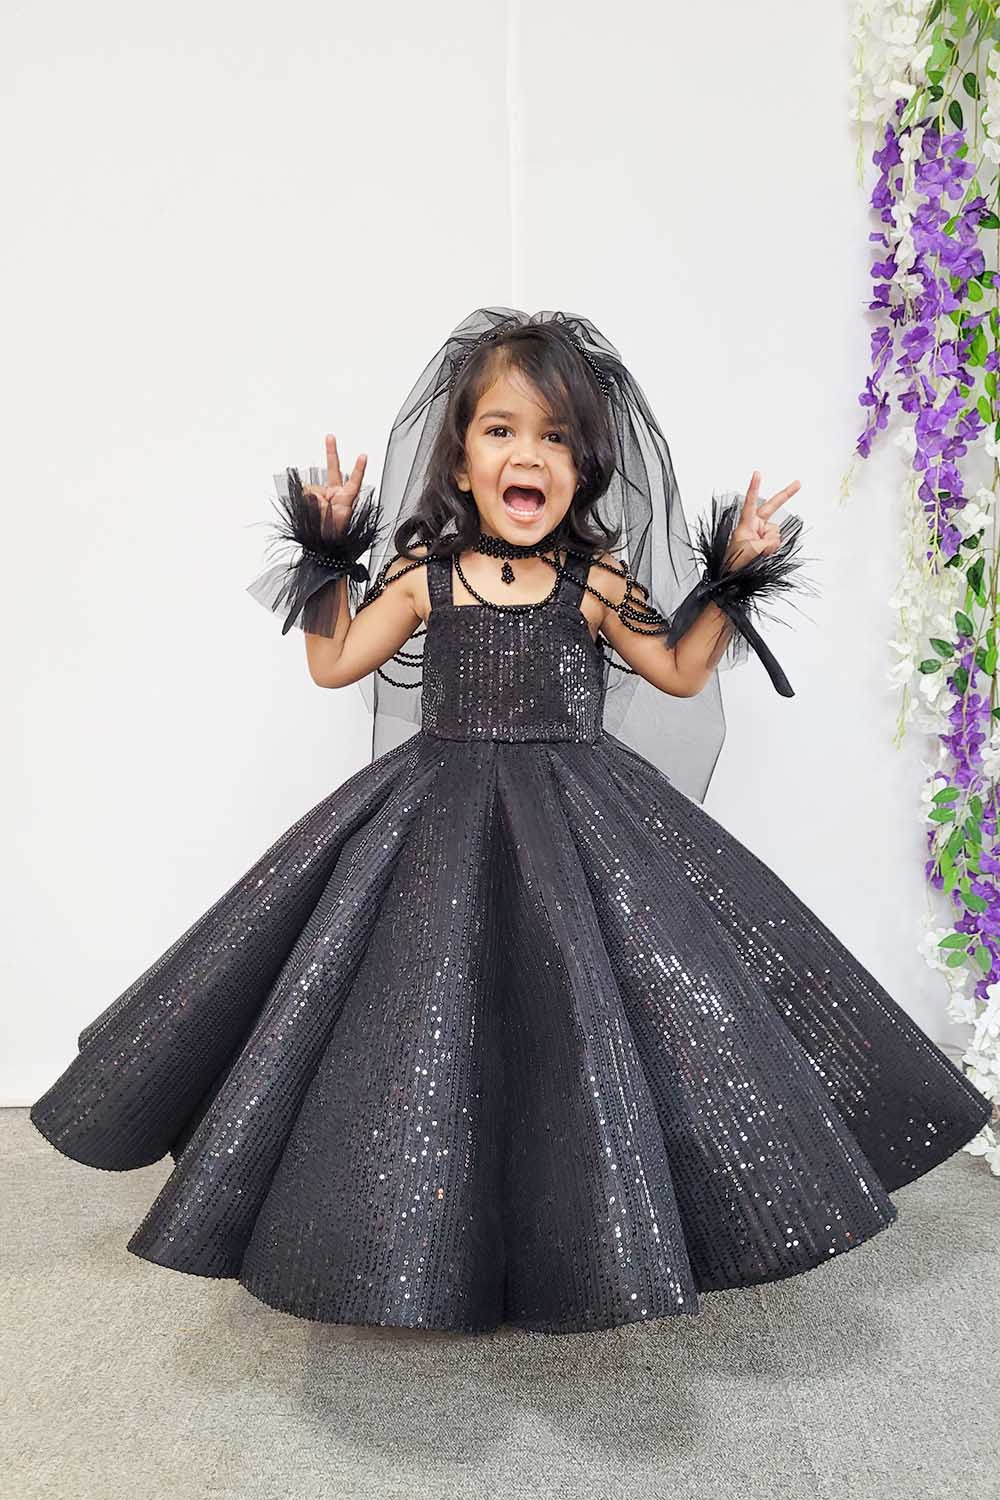 IDOPIP Toddler Kids Baby Girls Magnificent Halloween Costume Black Gown  with Horns Headband Feather Cape Wings Accessories Set Fancy Dress up  Cosplay Suit 2 Years Black 4PCS - Walmart.com